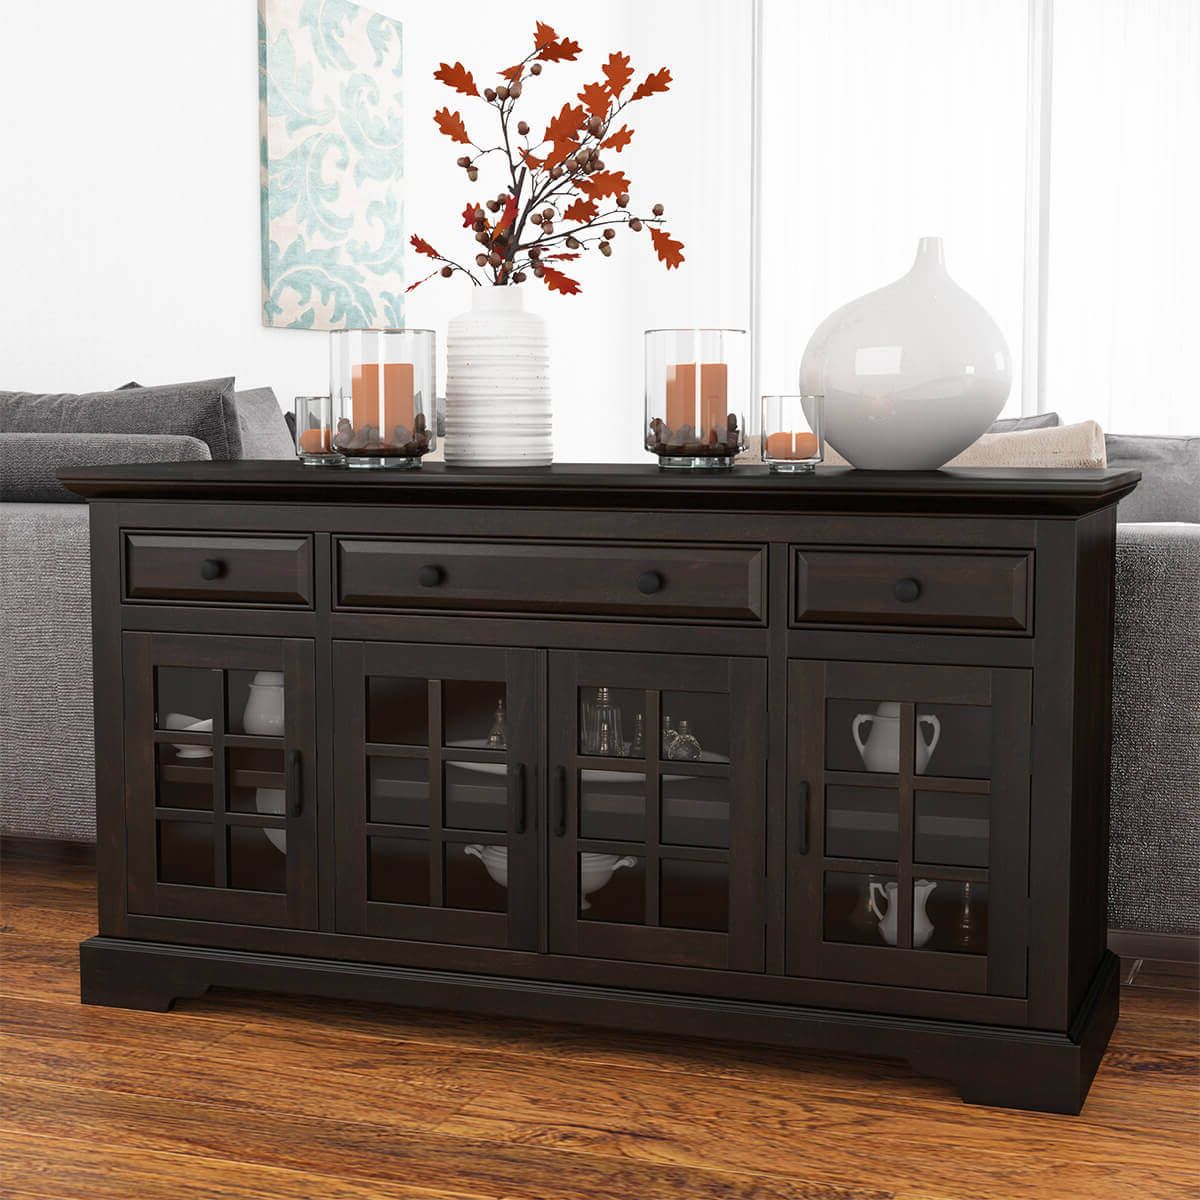 Tirana Rustic Solid Wood Glass Door 3 Drawer Large Sideboard Cabinet Throughout Sideboard Storage Cabinet With 3 Drawers &amp; 3 Doors (Gallery 20 of 20)